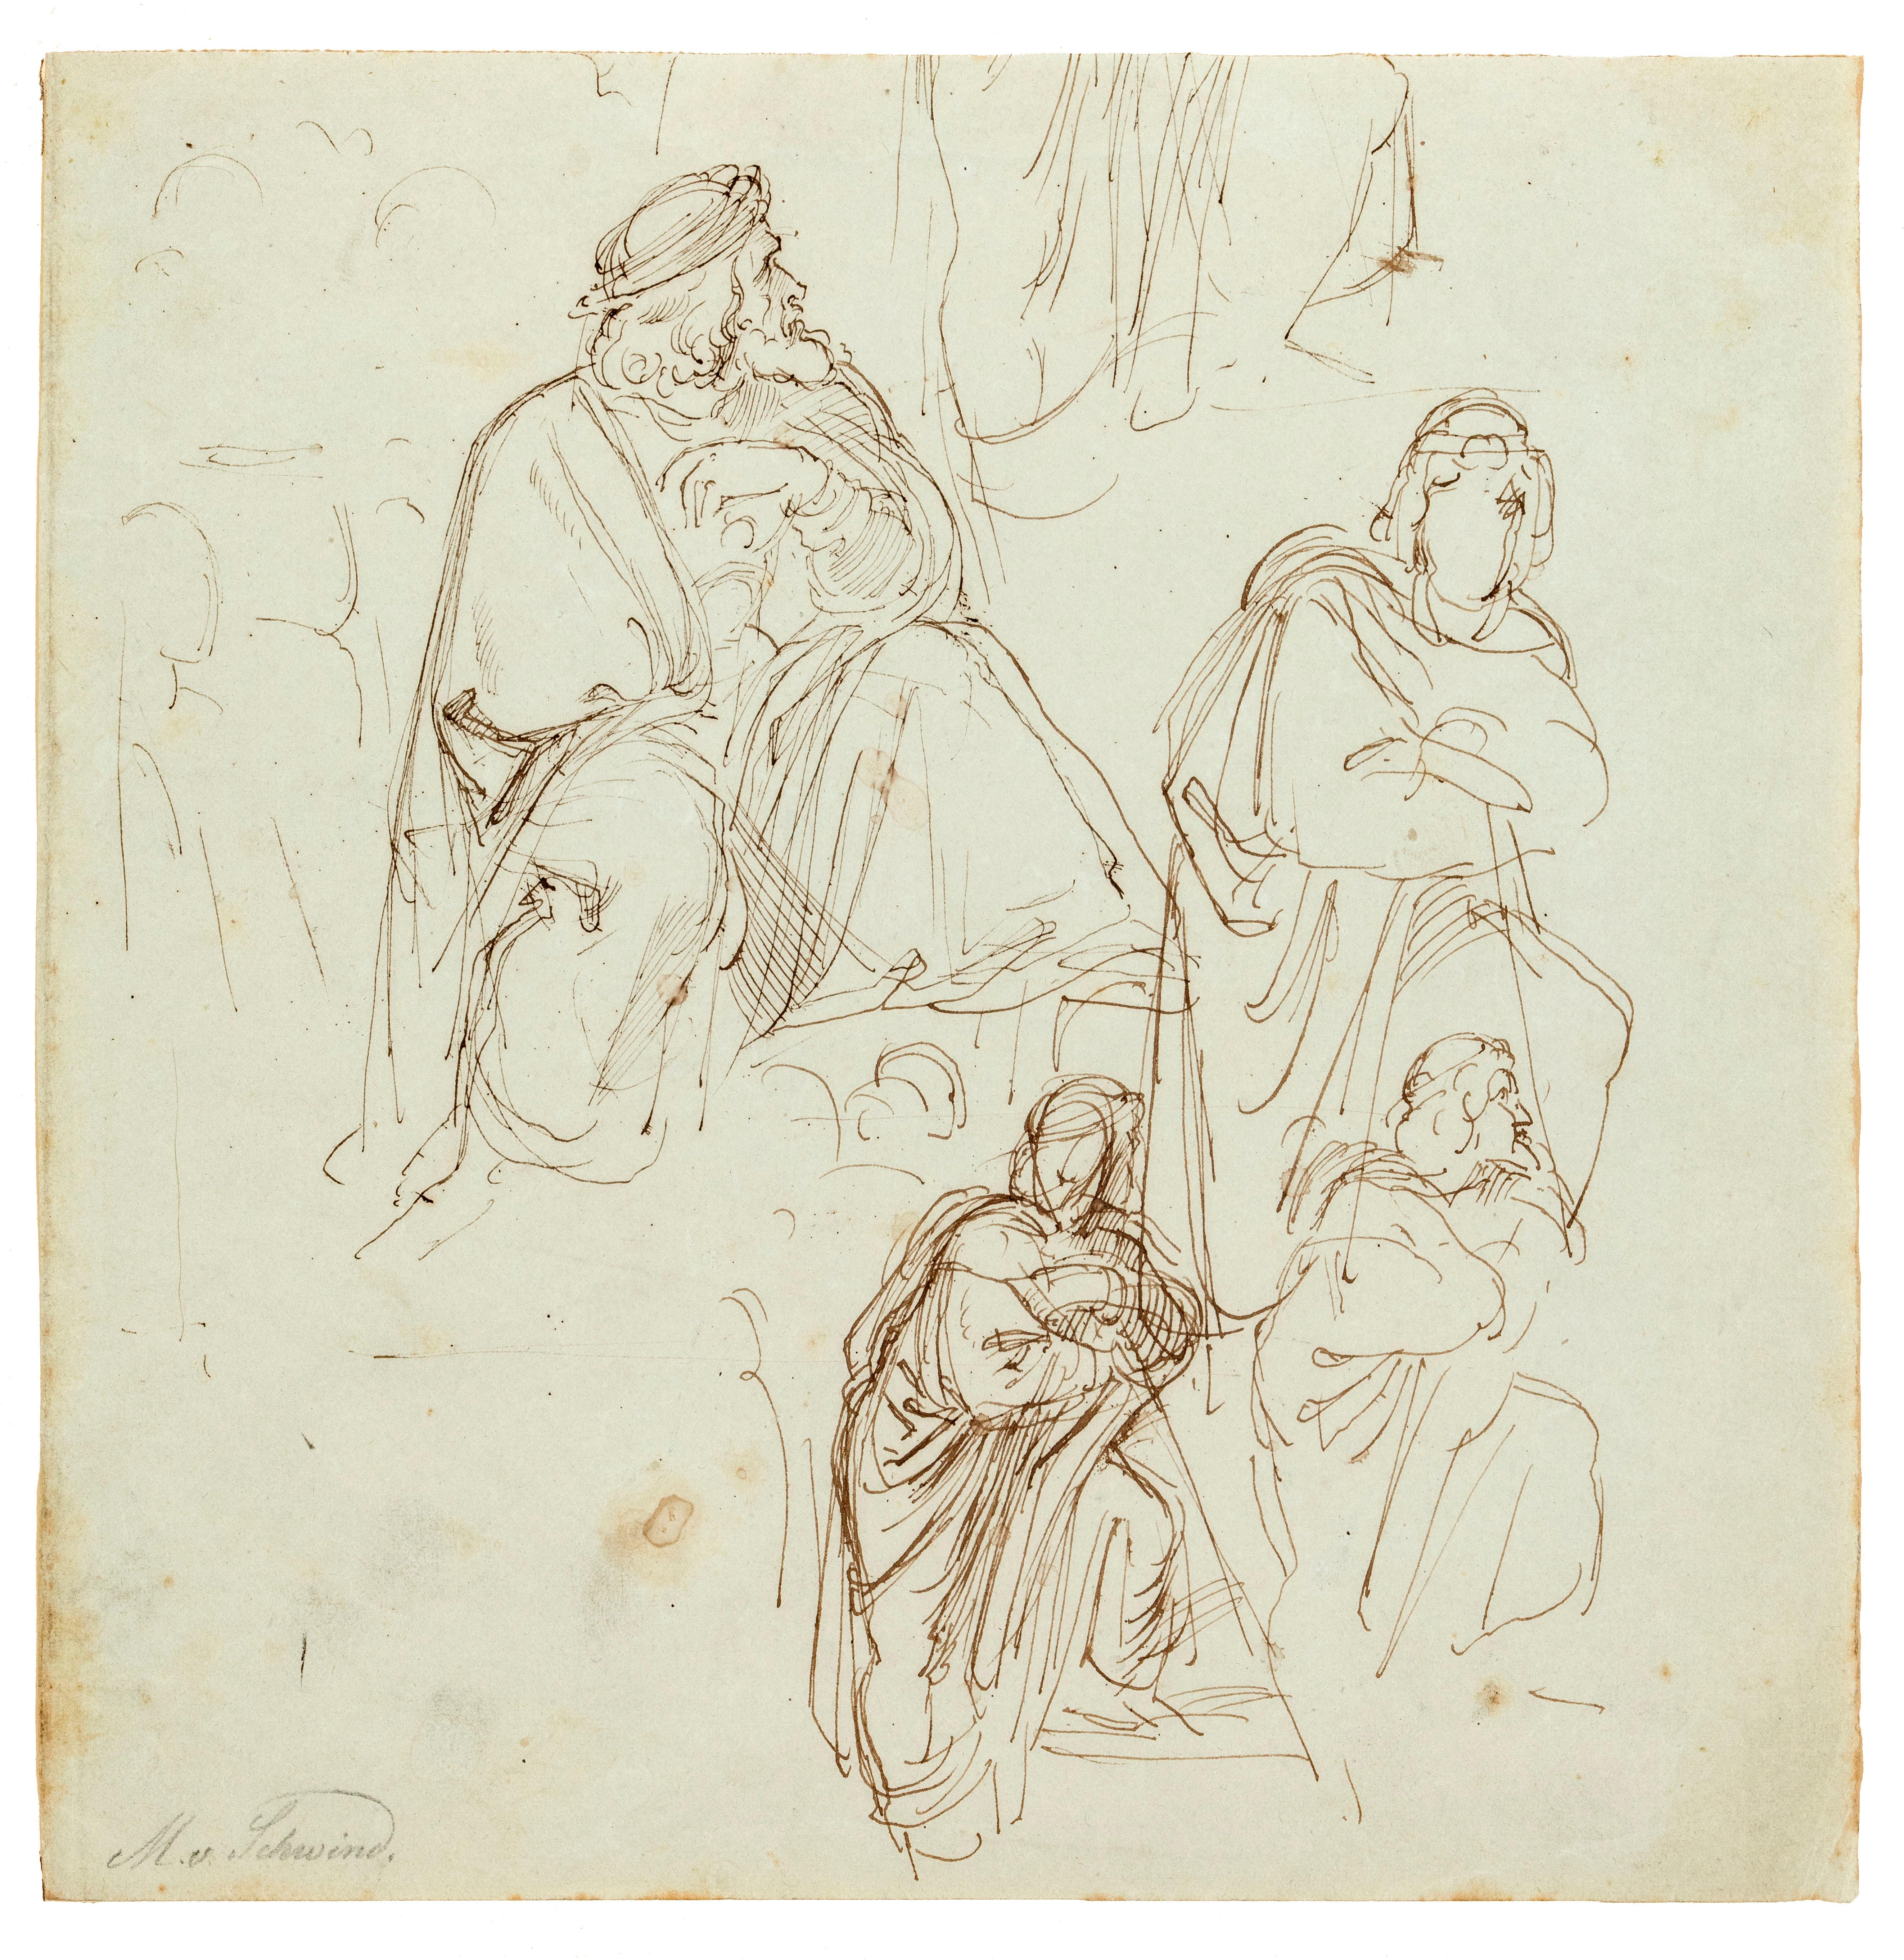 Moritz von Schwind Figurative Art - Studies of a Seated Figure for “The Contest of the Minnesingers at the Wartburg”